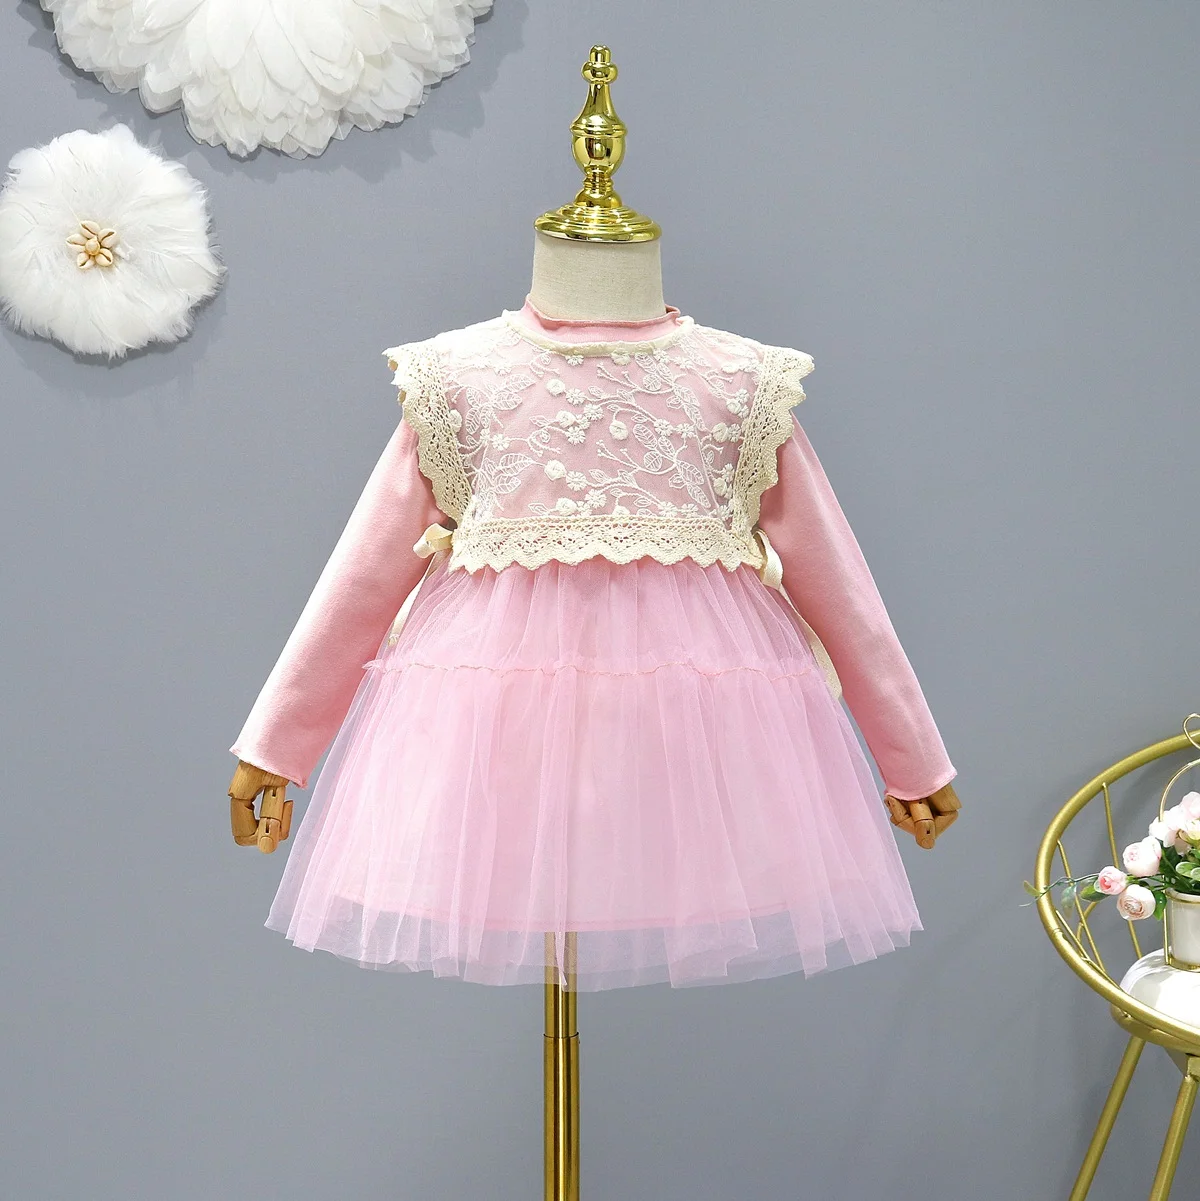 Baby Girls Dress Kids Clothes Princess Costume Lace Ruffles Spring Autumn 1-7 Years Party Dresses For Girl Children's Clothing